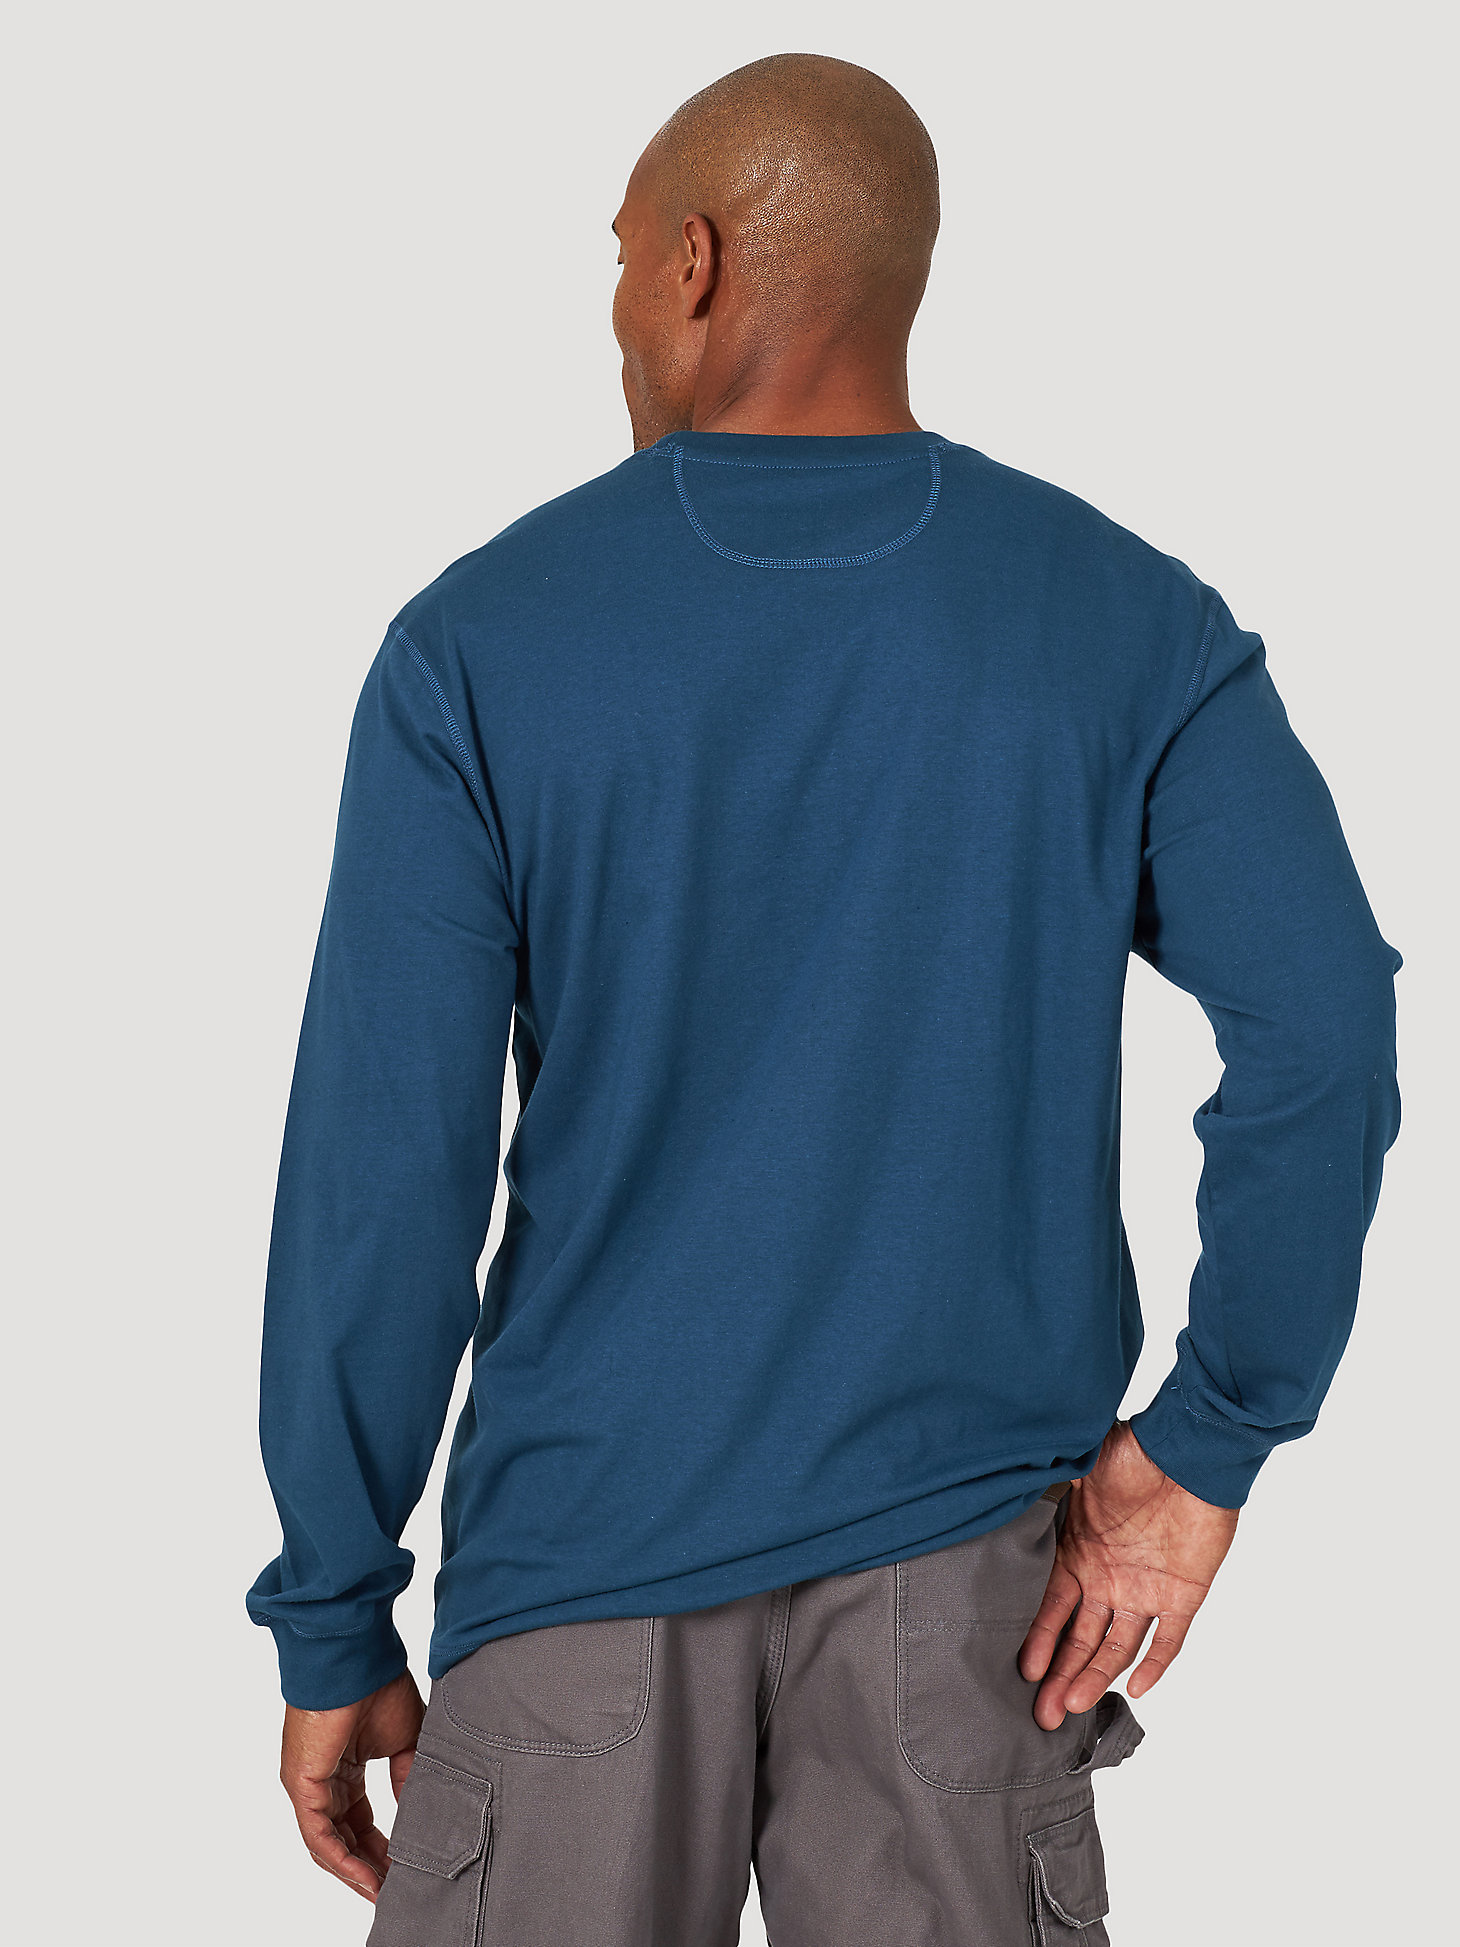 Wrangler® RIGGS Workwear® Long Sleeve 1 Pocket Performance T-Shirt in Oxford Blue alternative view 1